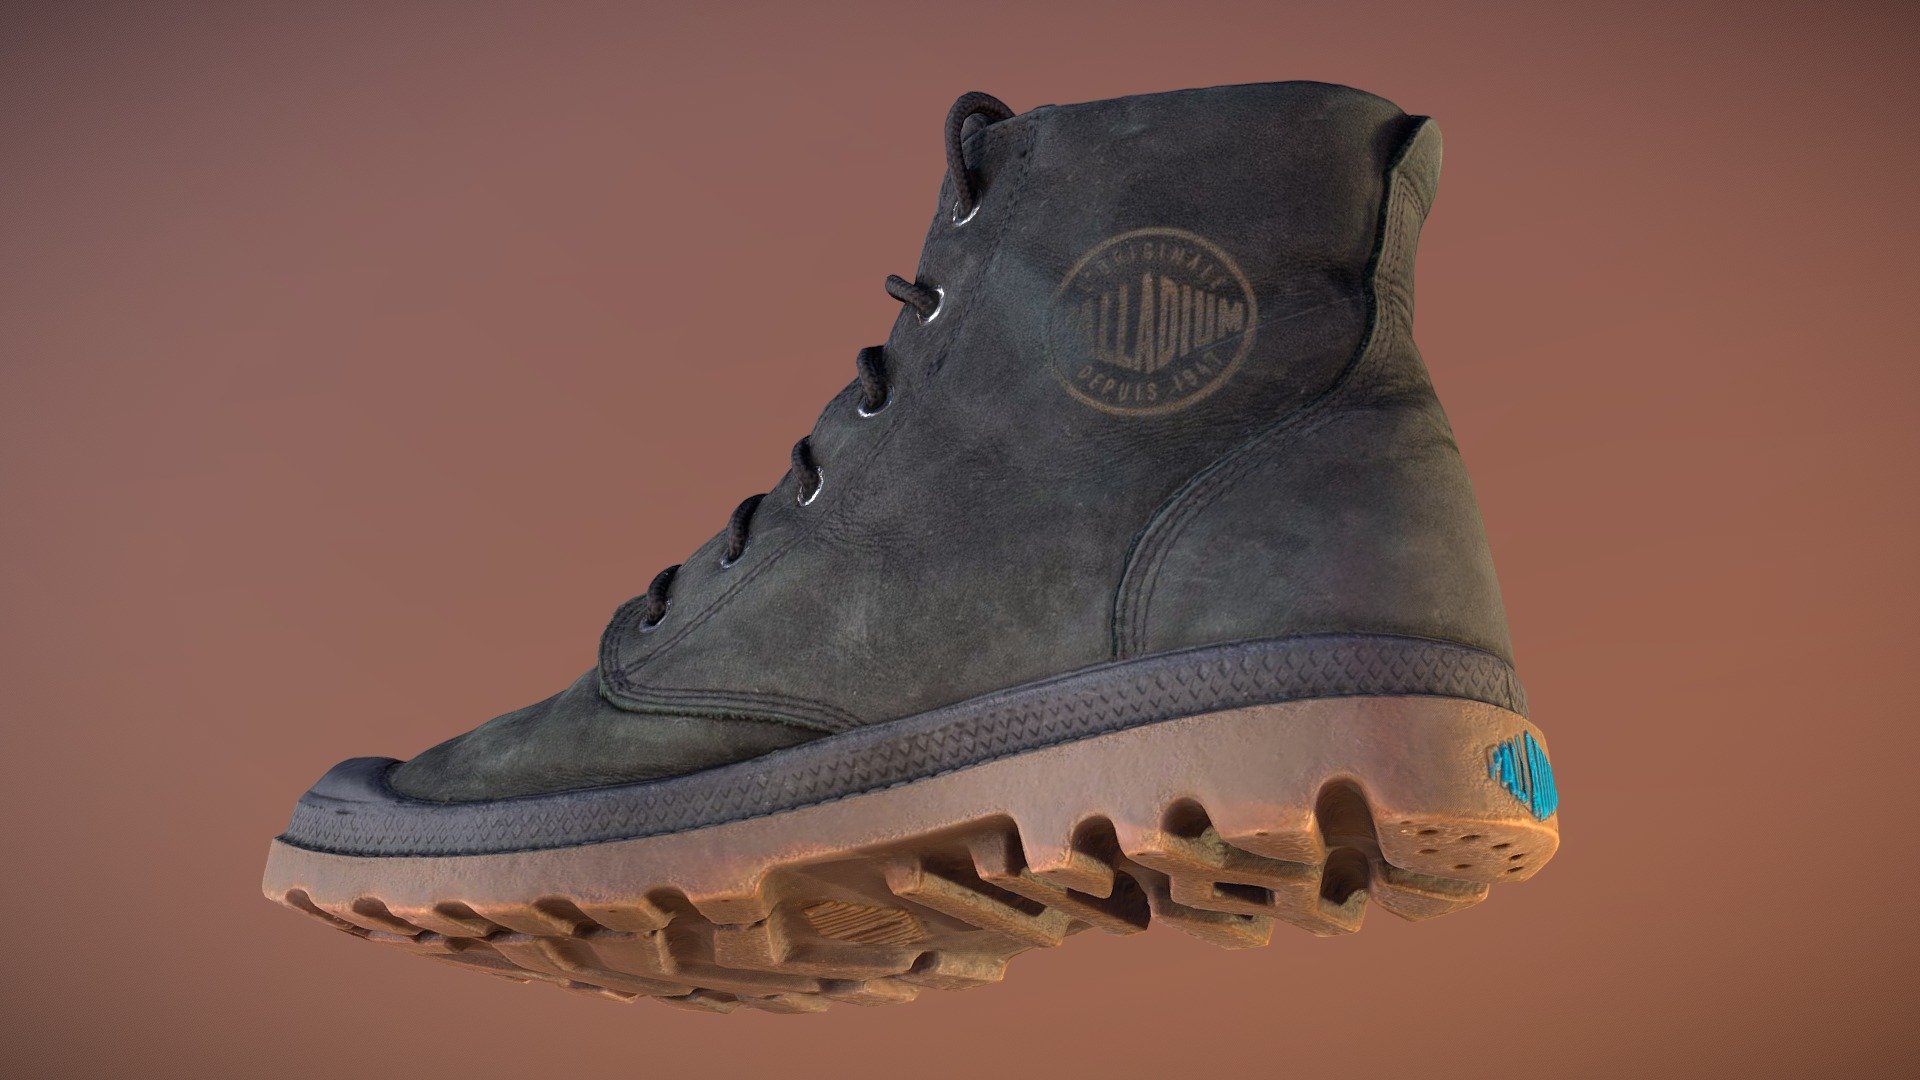 Palladium Boot, 3D scanned with a turntable, lots of polarized lights, and a single A7R (404 photos). Made an animated material breakdown on my Instagram: https://www.instagram.com/p/Bv2A5TSnO3_

Cleanup and retopology to quads in ZBrush. PBR workflow in Photoshop to create specularity, roughness, and metal maps.

High polygon (~920K poly) version of model and textures is included.

Full textures are 8K x 8K and low poly textures are at 2K x 2K 3d model